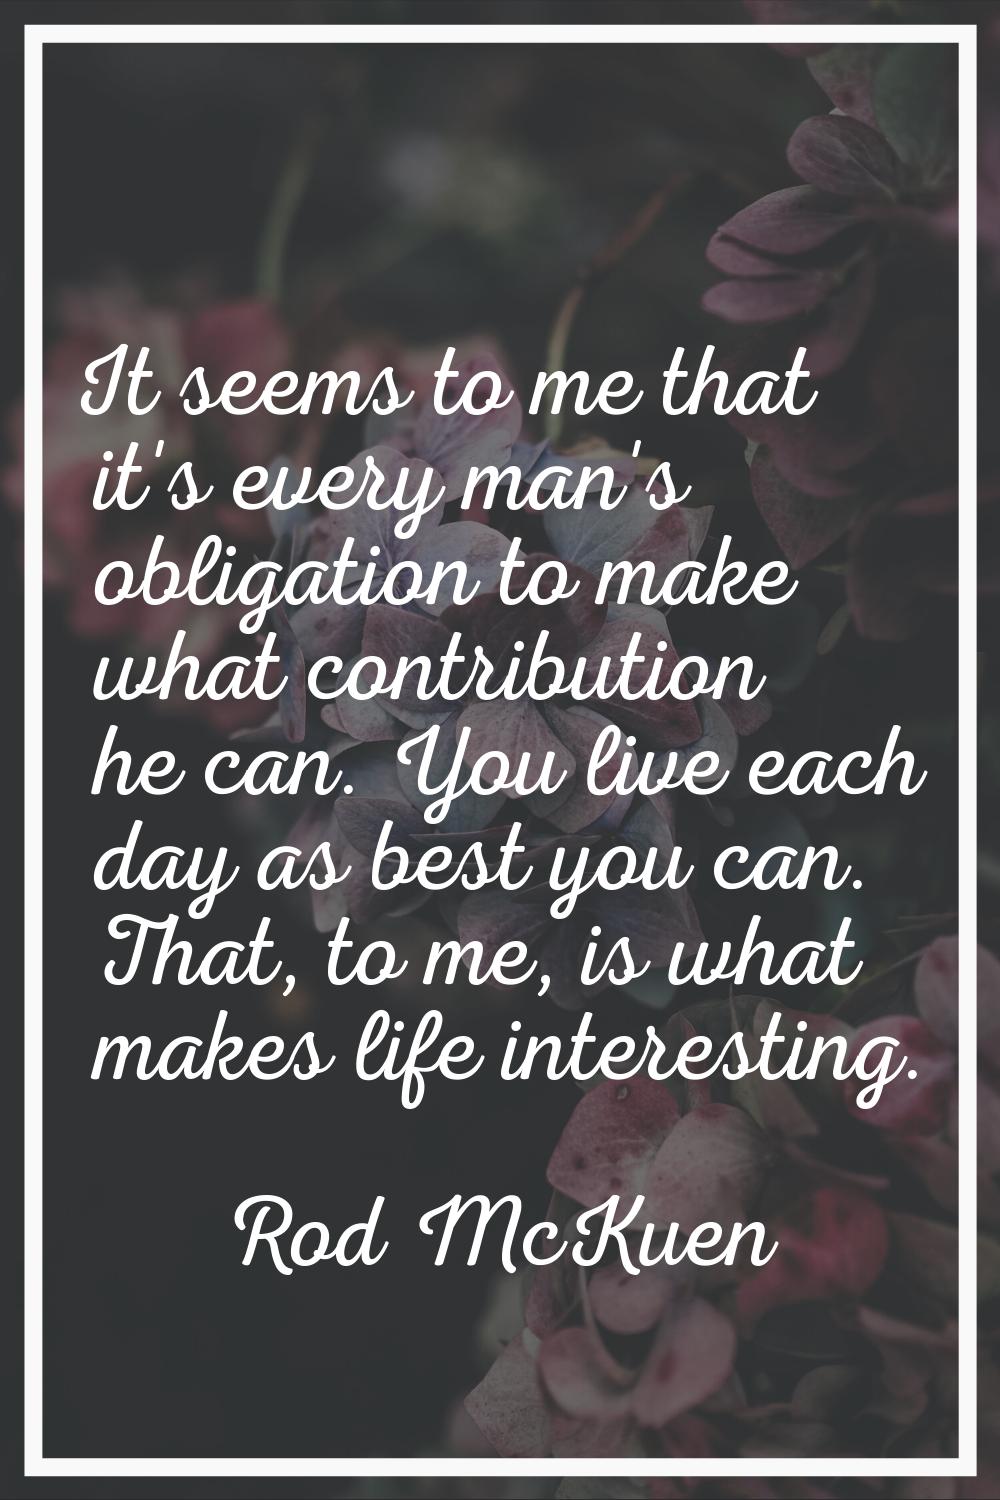 It seems to me that it's every man's obligation to make what contribution he can. You live each day